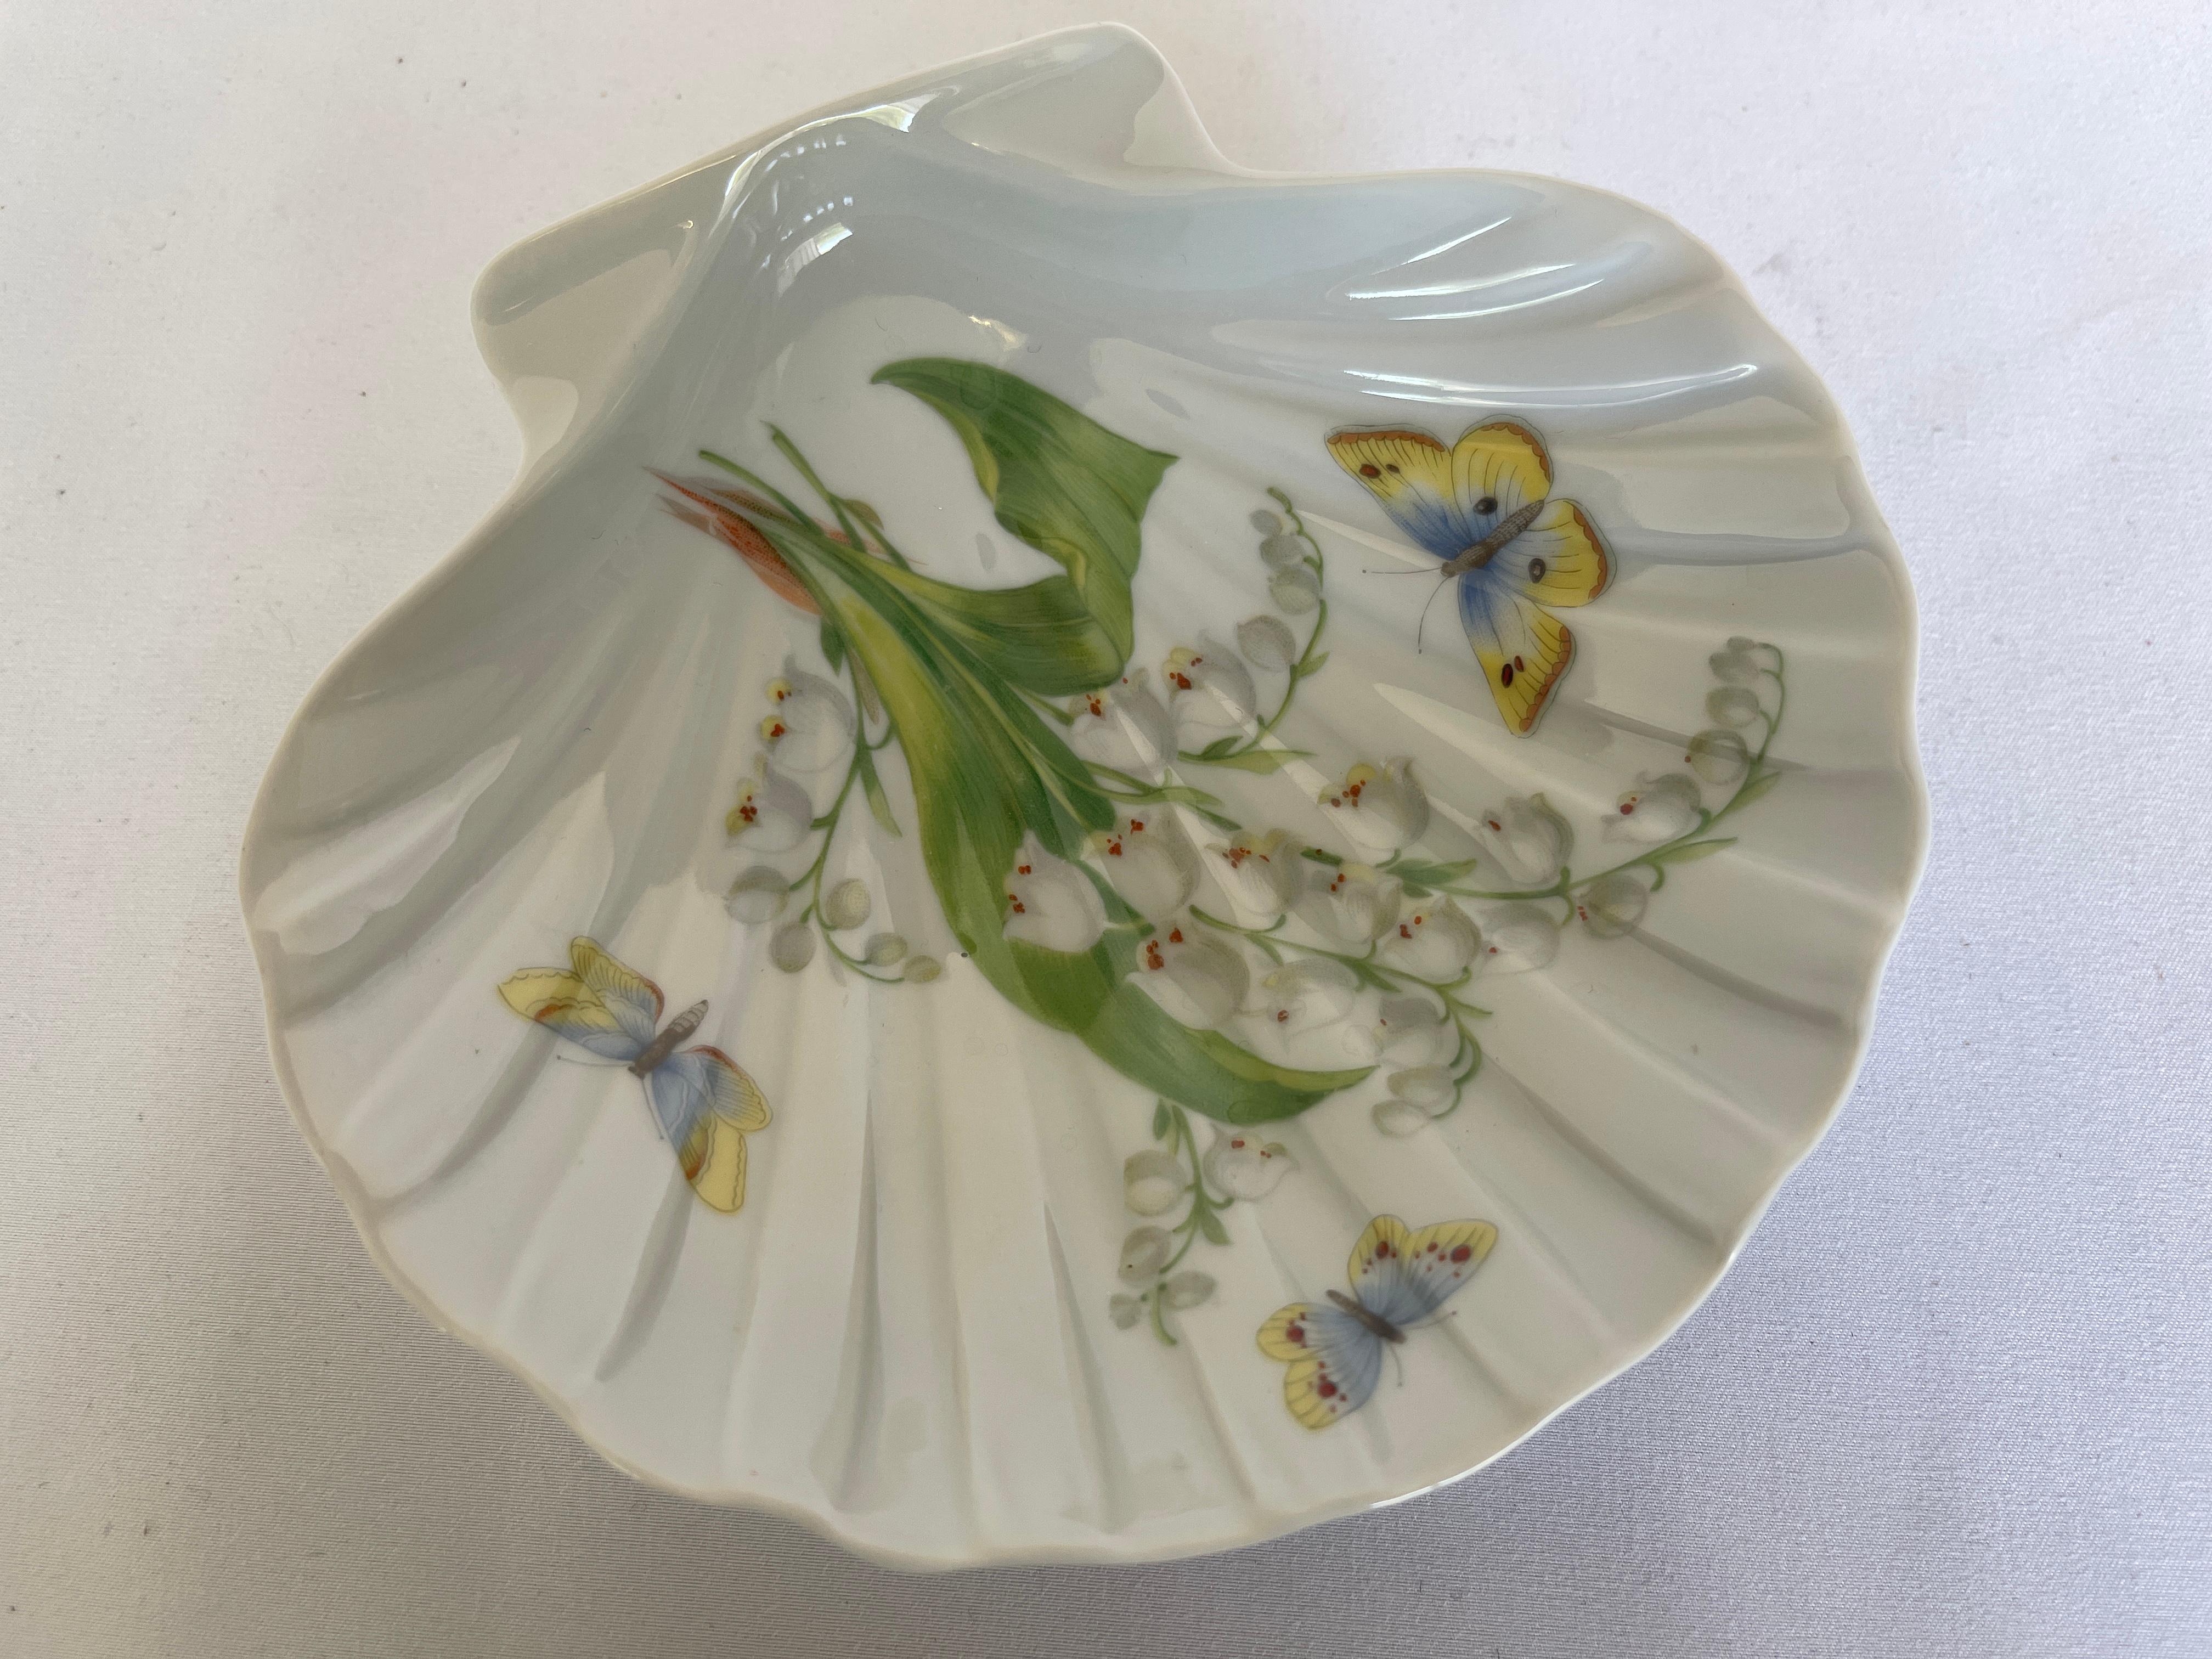 Limoges white porcelain sea shell dish with hand painted lily-of-the-valley and butterfly design, c. mid 20th century, France.
Signed Limoges France on bottom.
 